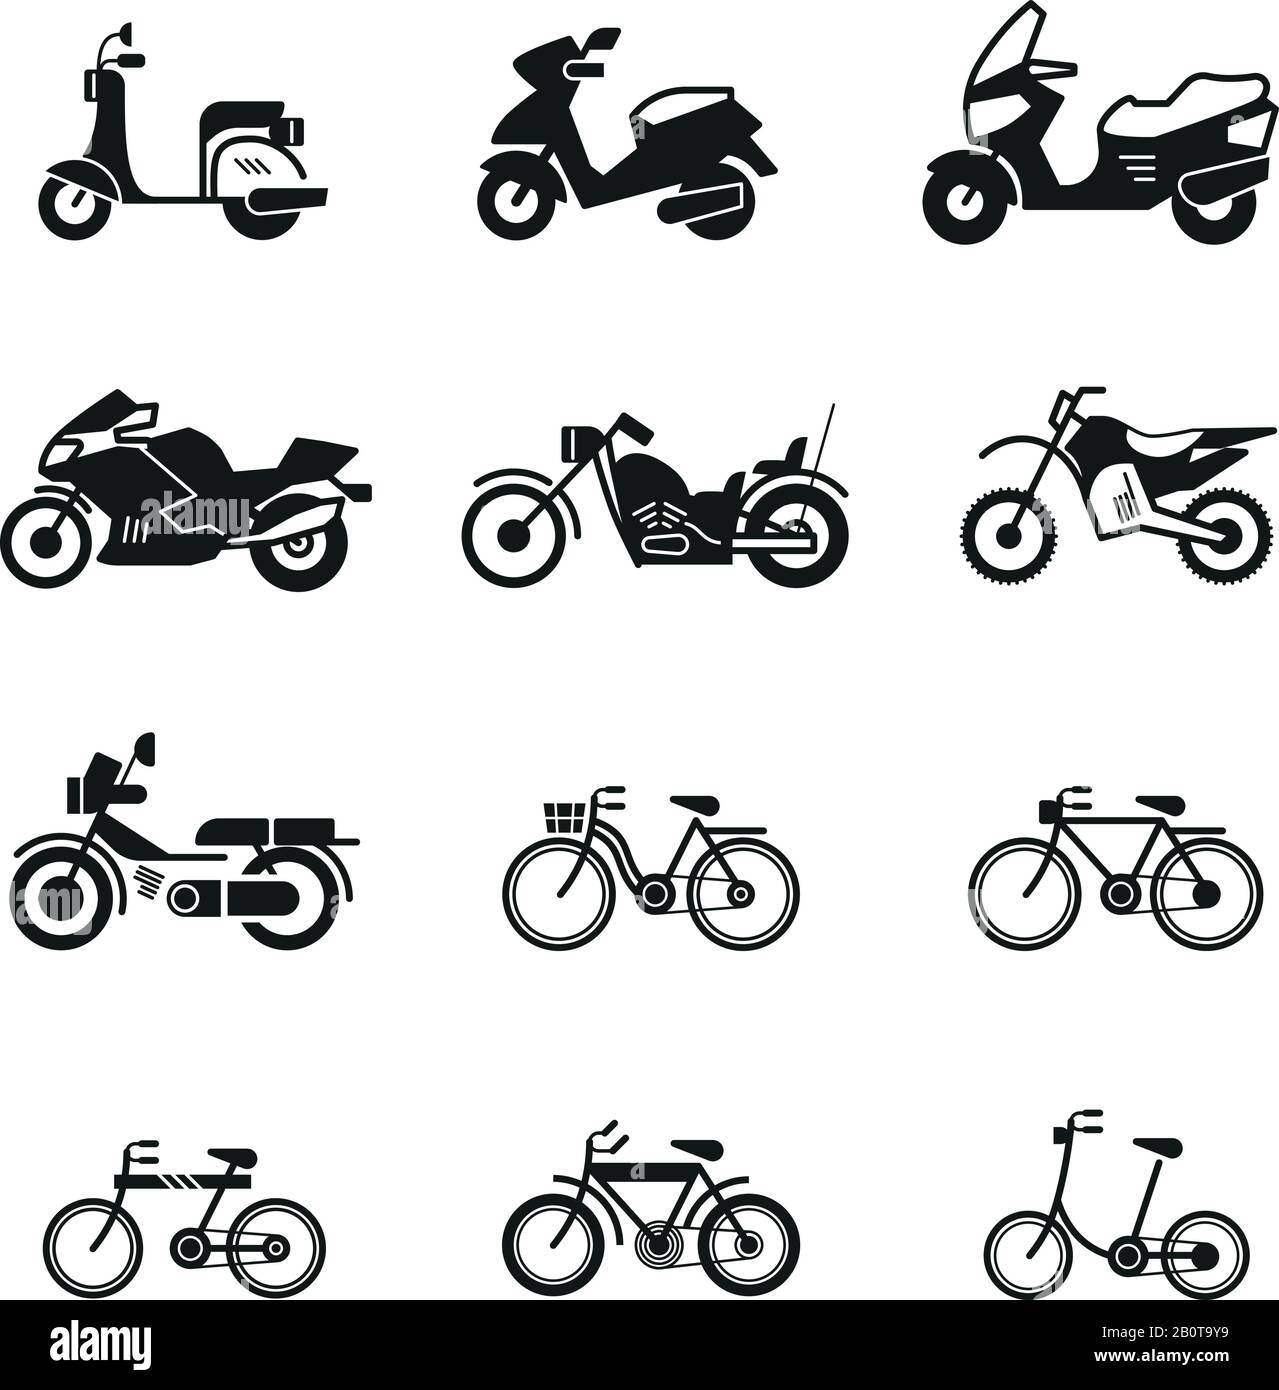 Motorcycle, motorbike, scooter, chopper and bicycle vector silhouette icons. Speed motorcycle and scooter illustration of bicycle and motorbike Stock Vector